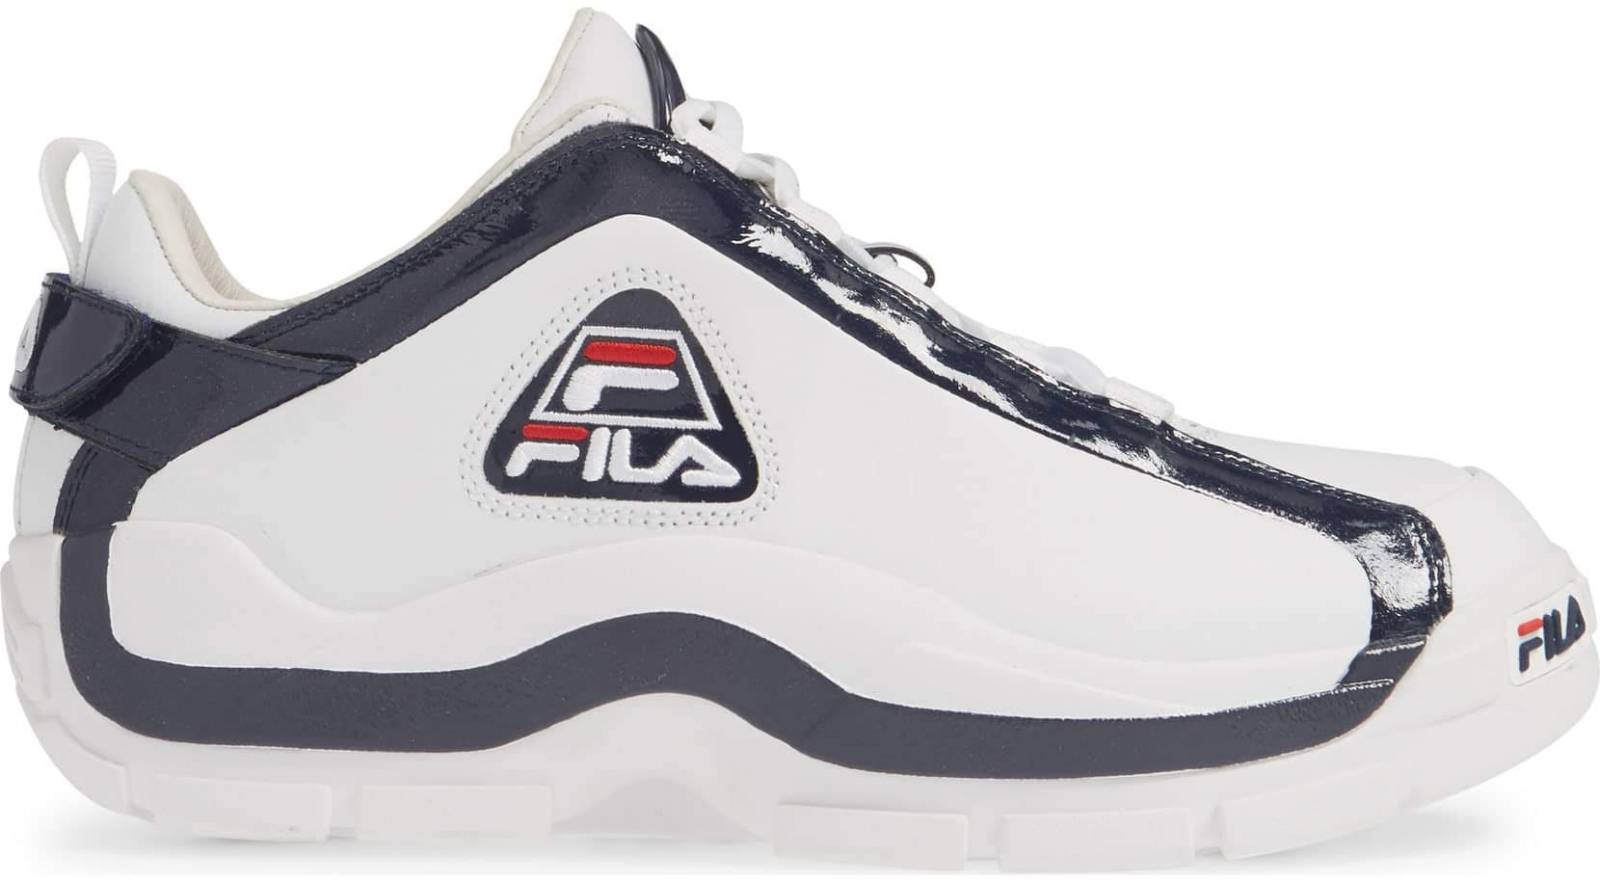 Only $66 + Review of Fila 96 Low 